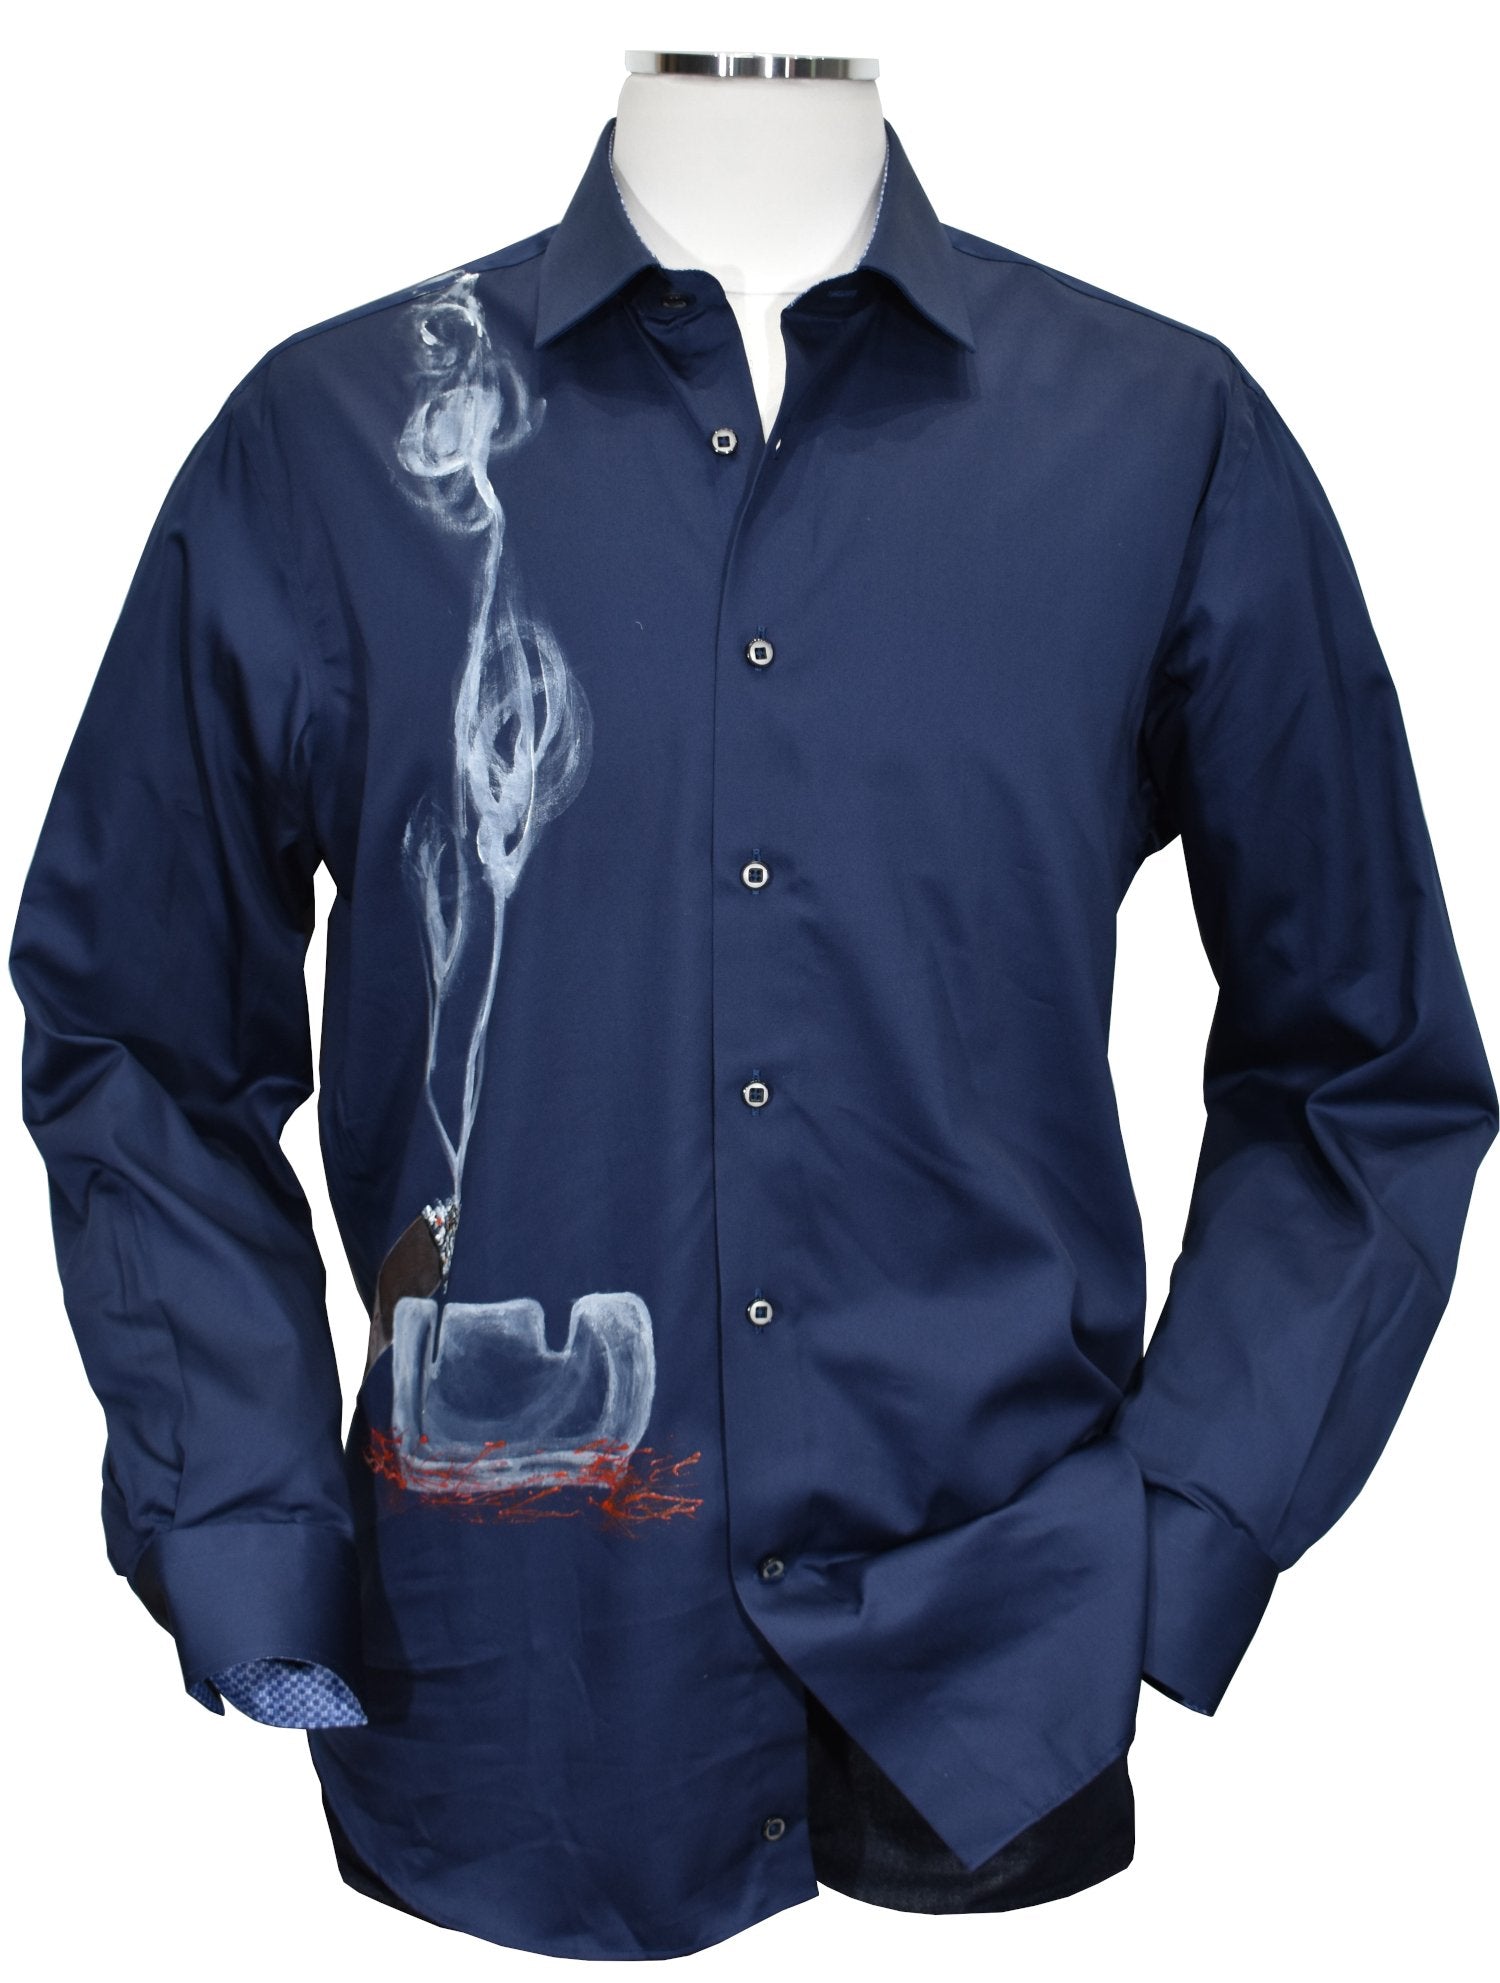 Be unique and stand out with this one-of-a-kind Marcello Hand Painted Cigar shirt. Crafted with luxurious cotton sateen fabric for a soft feel, its exclusive hand painted design will have heads turning. Dare to be bold with this must-have piece! by Marcello